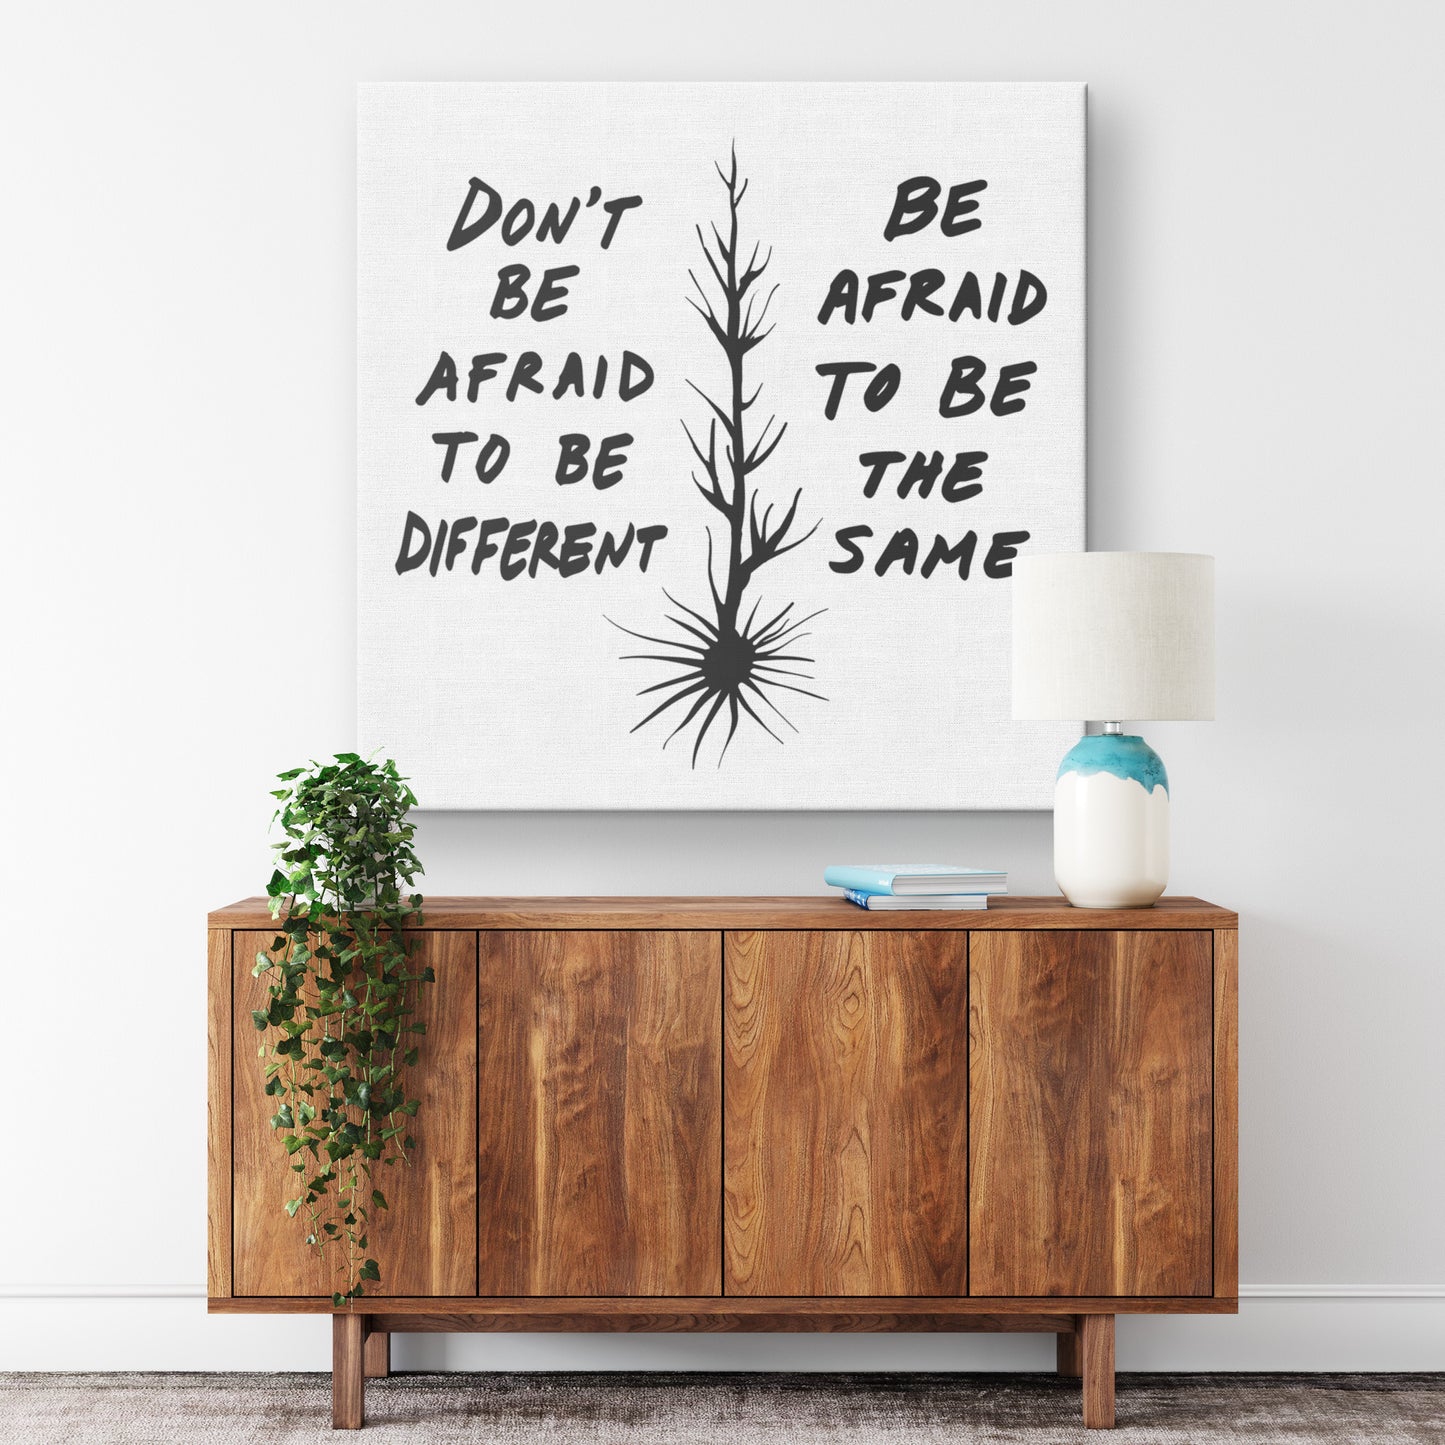 motivational quote canvases from Michael Carini and Carini Arts